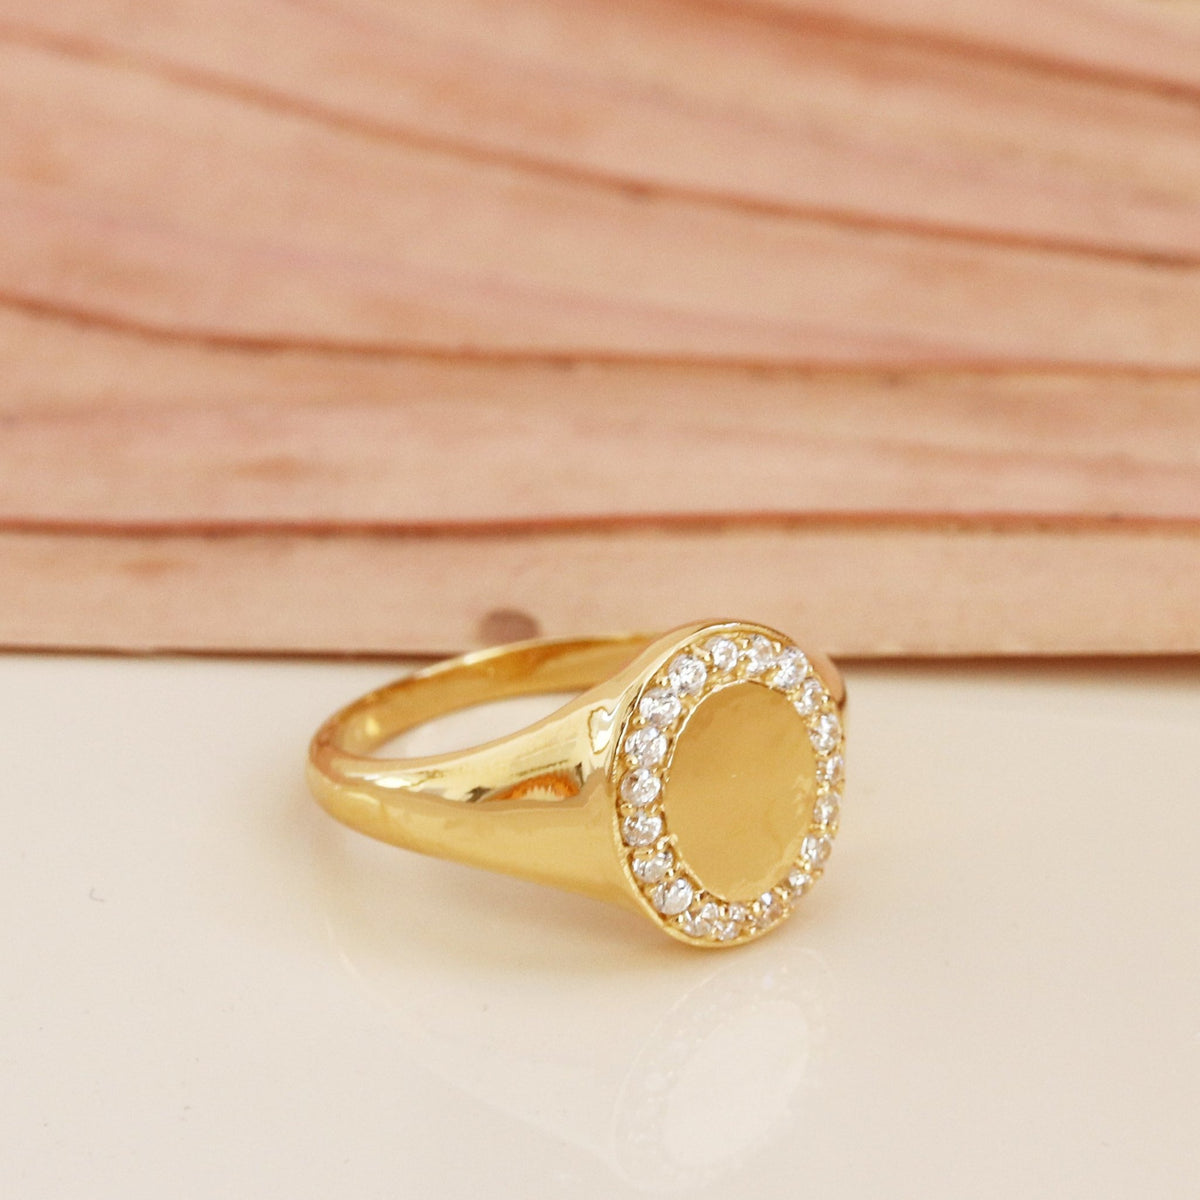 LOVE OVAL SIGNET RING - CUBIC ZIRCONIA &amp; GOLD - SO PRETTY CARA COTTER